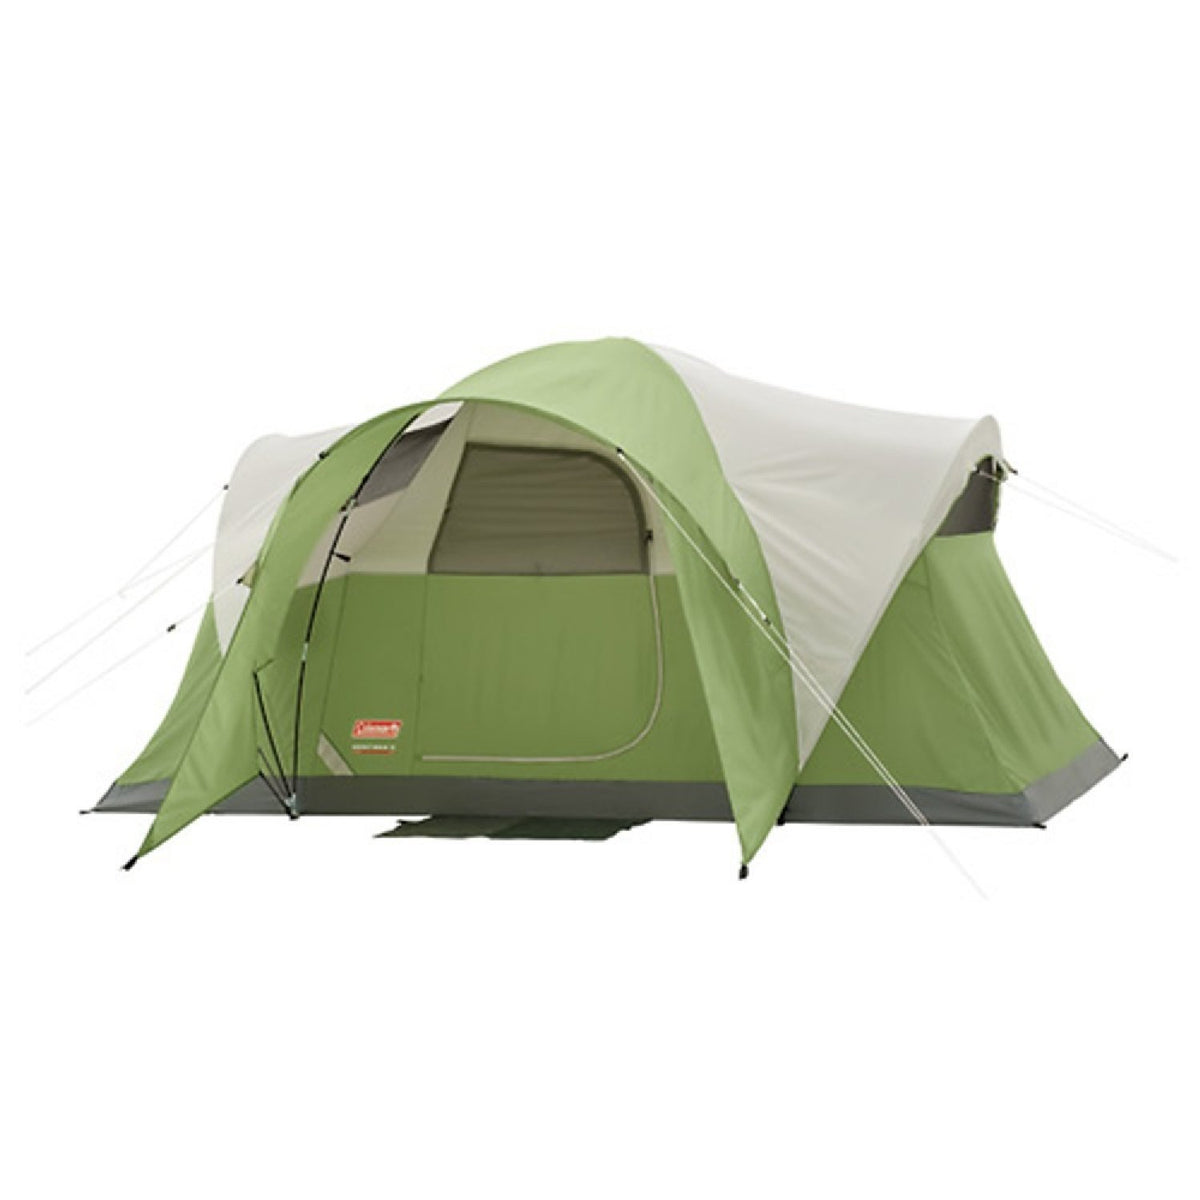 buy camping tents at cheap rate in bulk. wholesale & retail sporting supplies store.